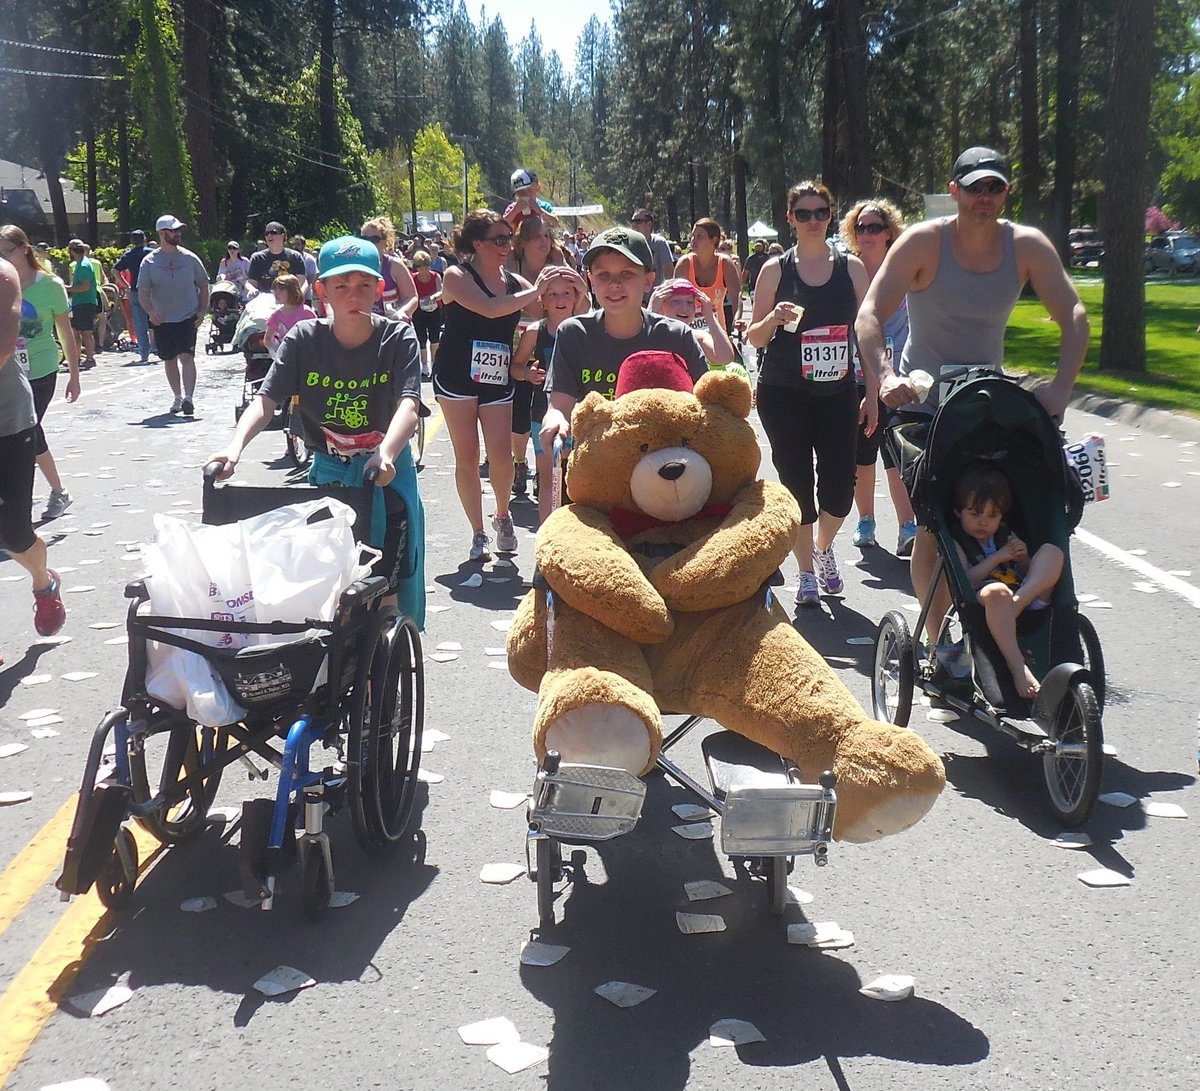 🌟 Less than 2 weeks until Bloomsday! 🌟 As this year's Charity of Choice, Bloomies can support Shriners Children's Spokane by adding a donation at registration. Help provide life-changing care to children. Register: ow.ly/9Xl250RlEEI #ACenturyOfCare #ShrinersChildrens